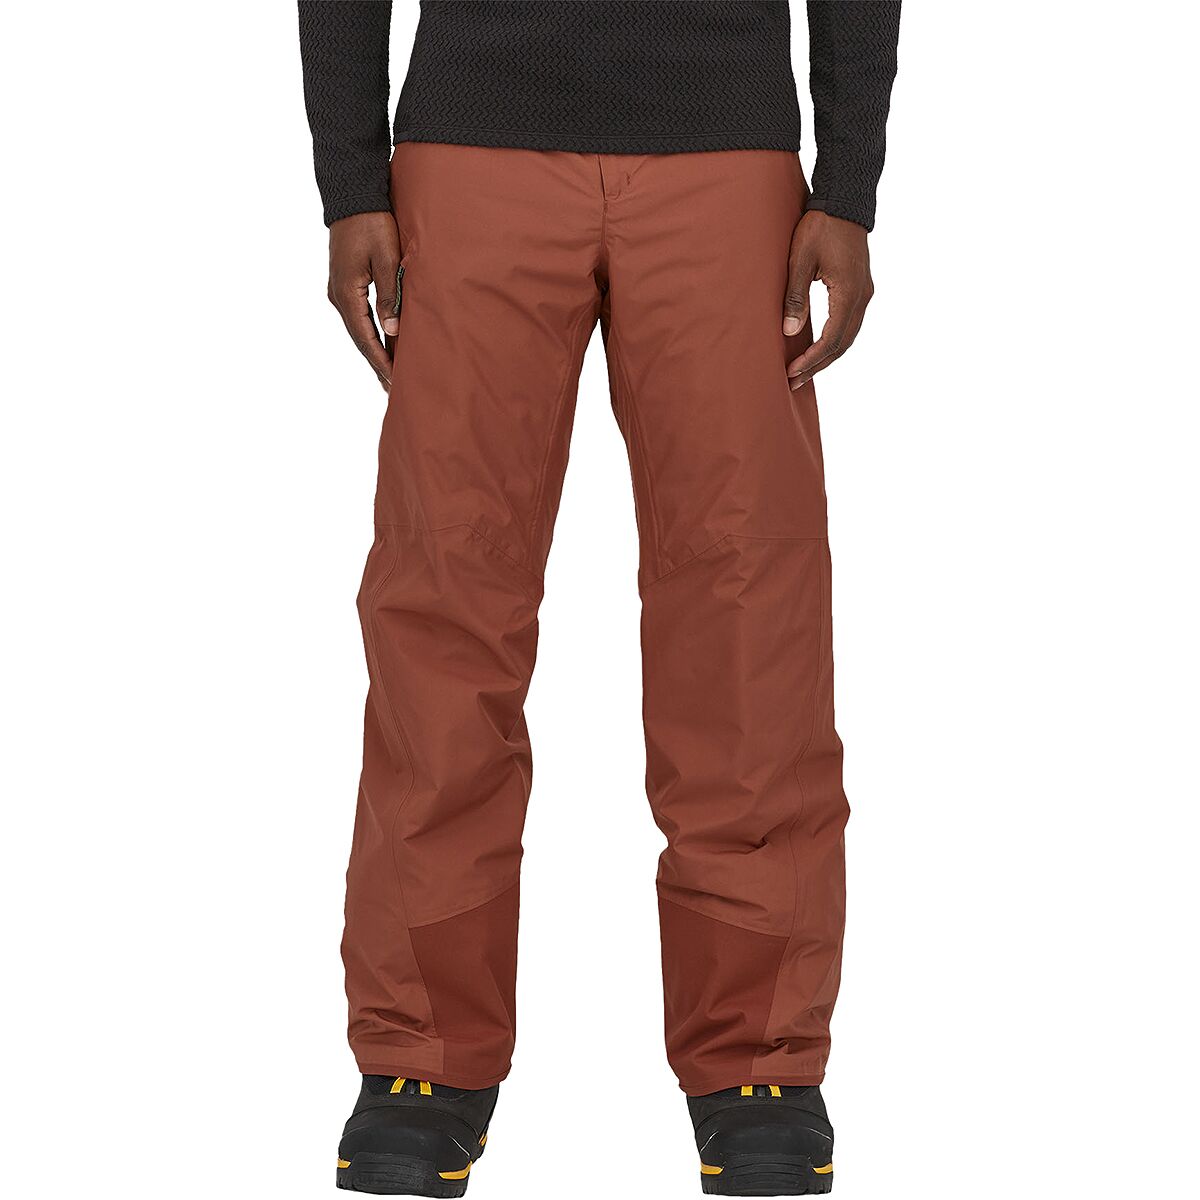 Insulated Powder Town Pant - Men